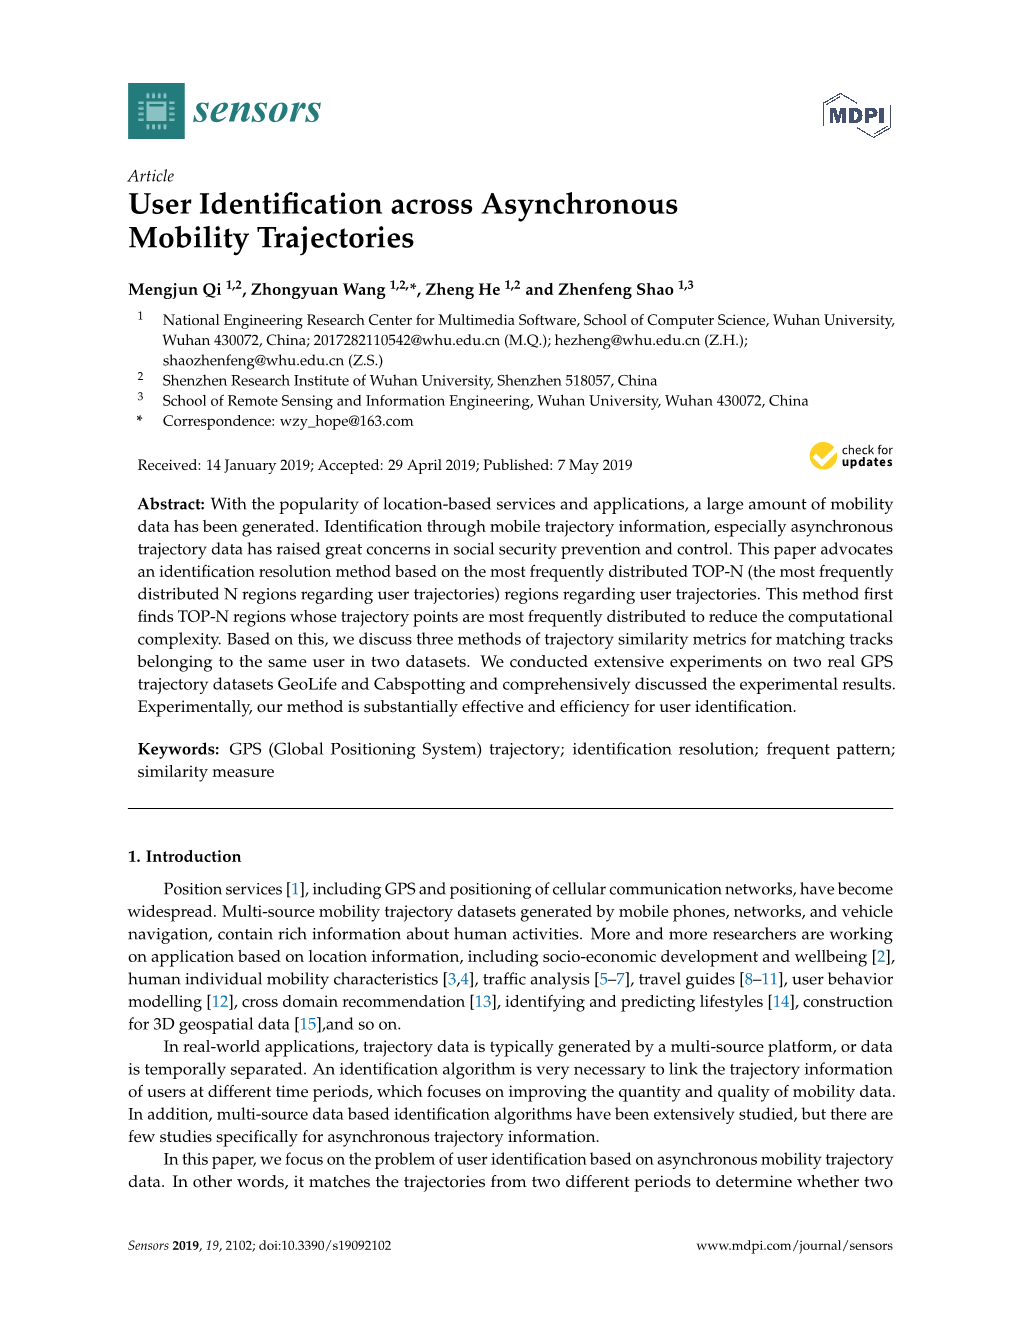 User Identification Across Asynchronous Mobility Trajectories